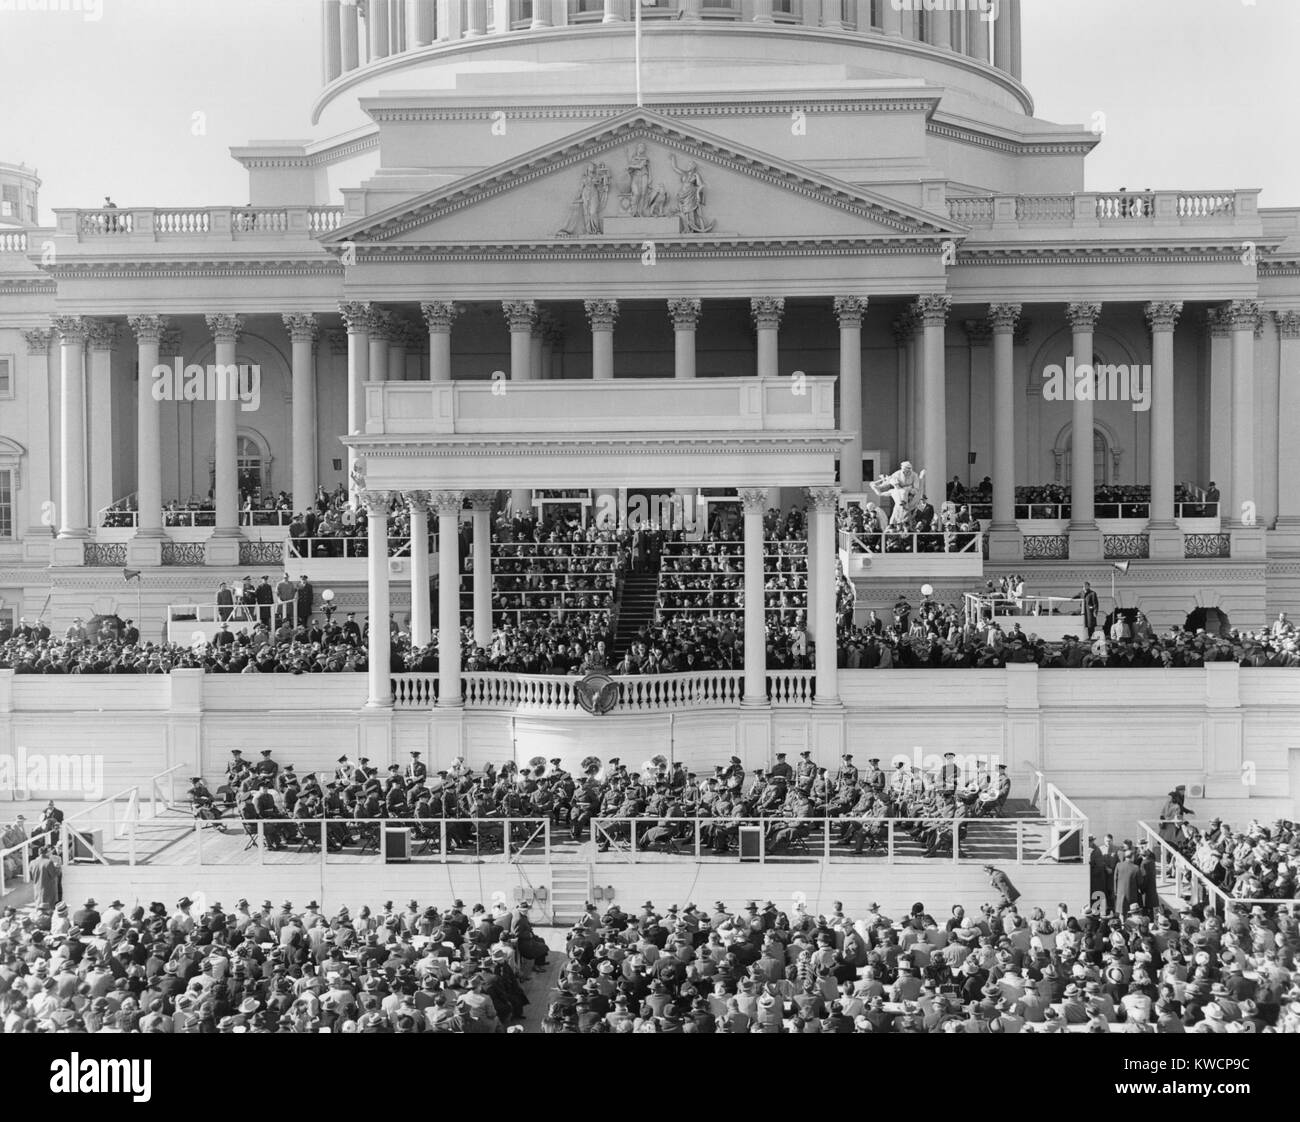 View of the inauguration of President Harry Truman showing the President speaking at the podium. Jan. 20, 1949. - (BSLOC 2014 15 57) Stock Photo